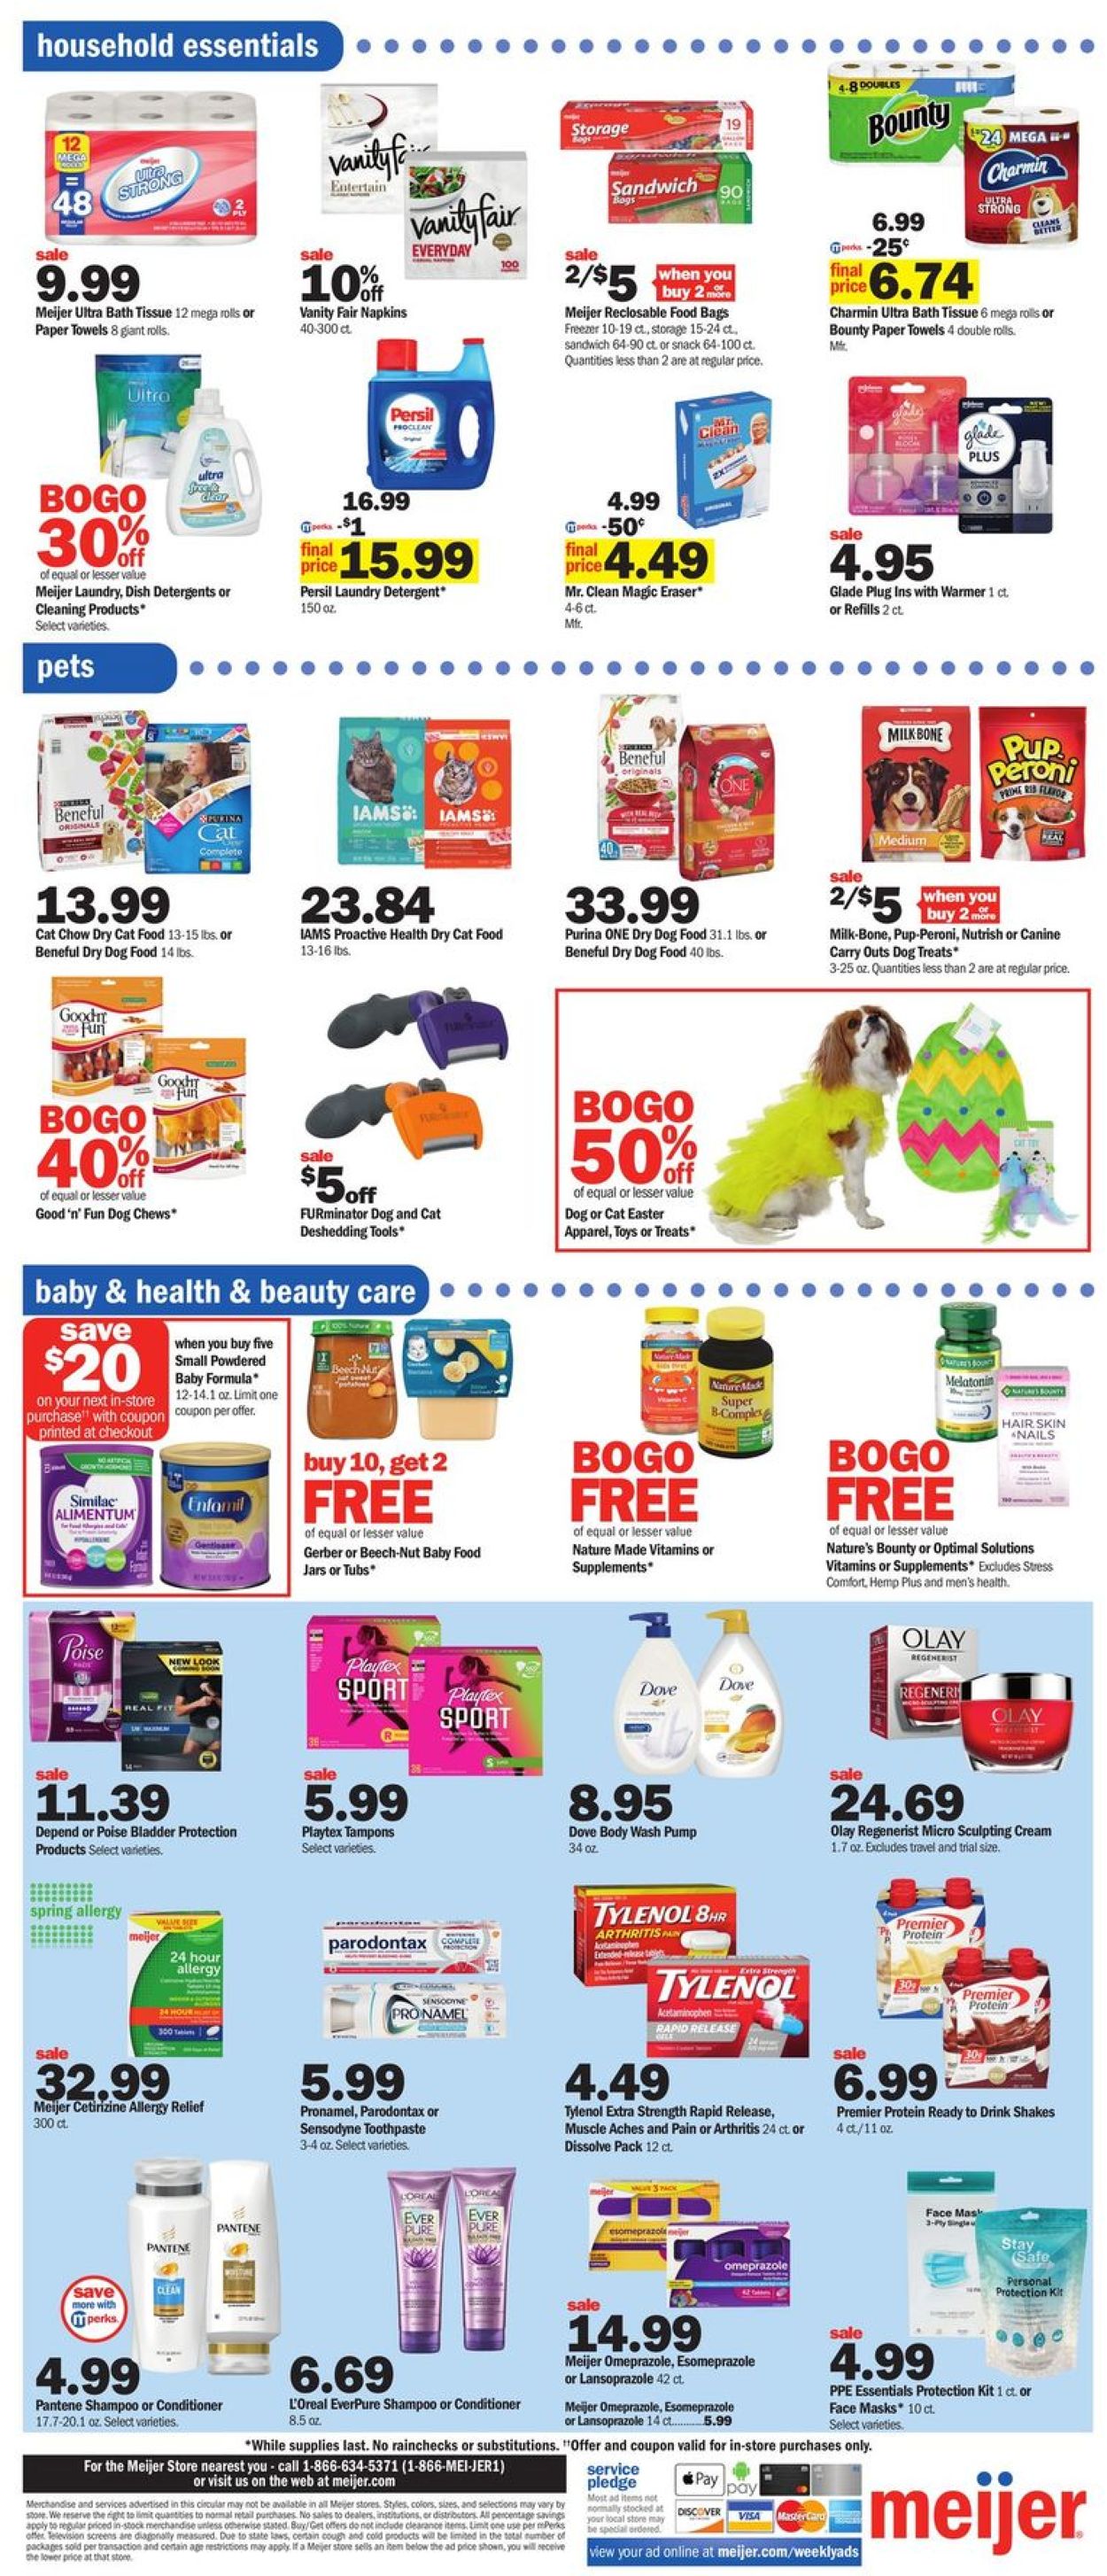 Meijer - Easter 2021 ad Weekly Ad Circular - valid 03/28-04/03/2021 (Page 14)